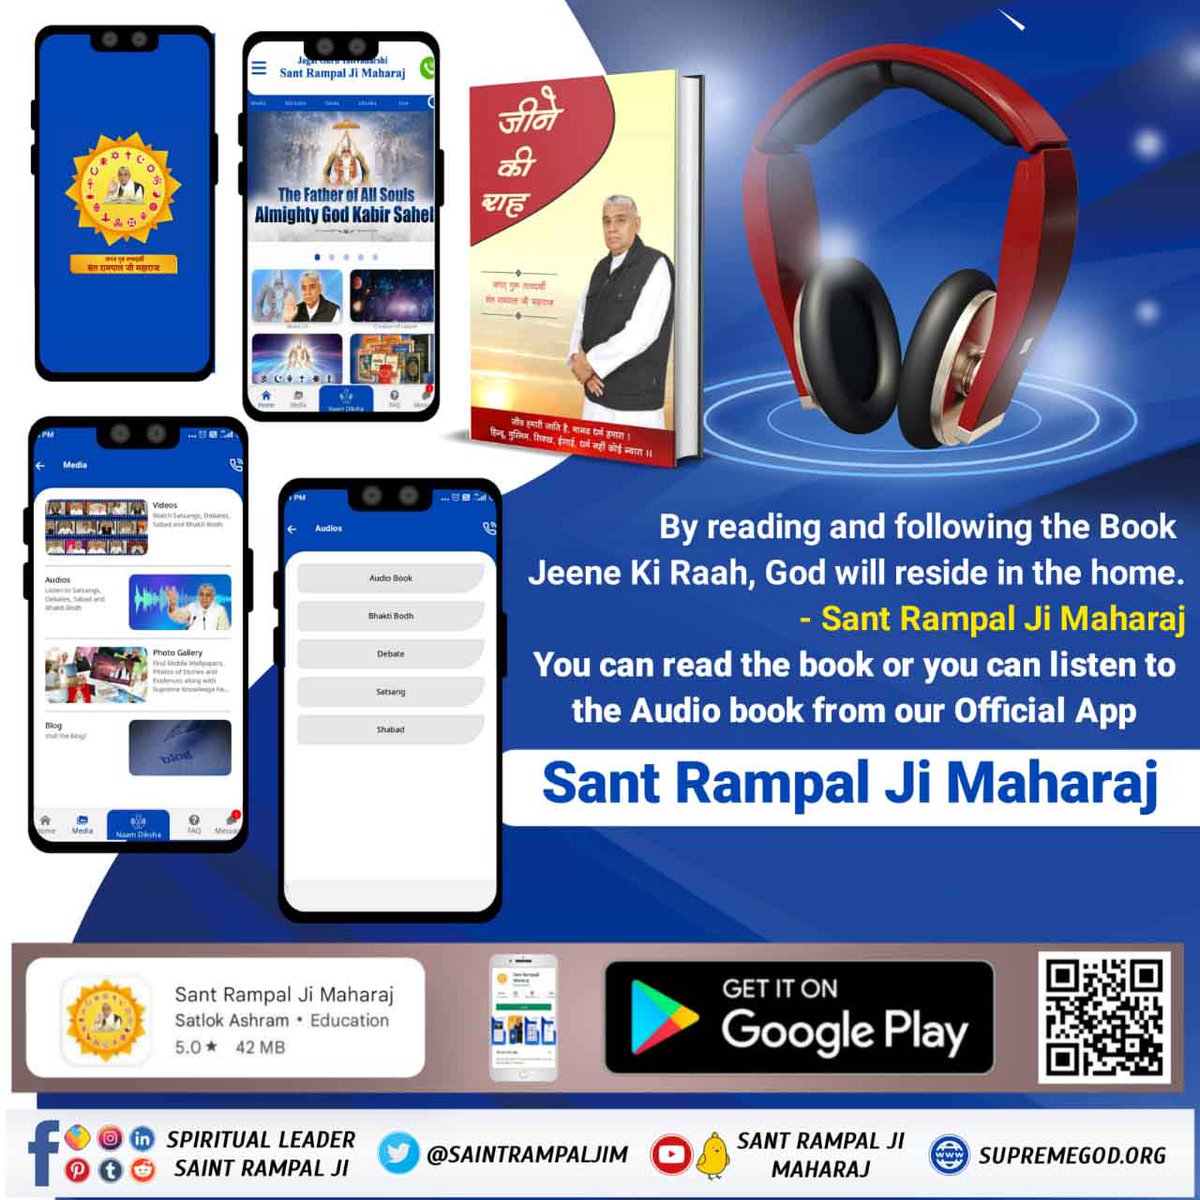 #AudioBook_JeeneKiRah 
By reading and following the Book Jeene Ki Raah, God will reside in the home. - Sant Rampal Ji Maharaj

You can read the book or you can listen to the Audio book from our Official App 
[Sant Rampal Ji Maharaj] In Googal Playstore.